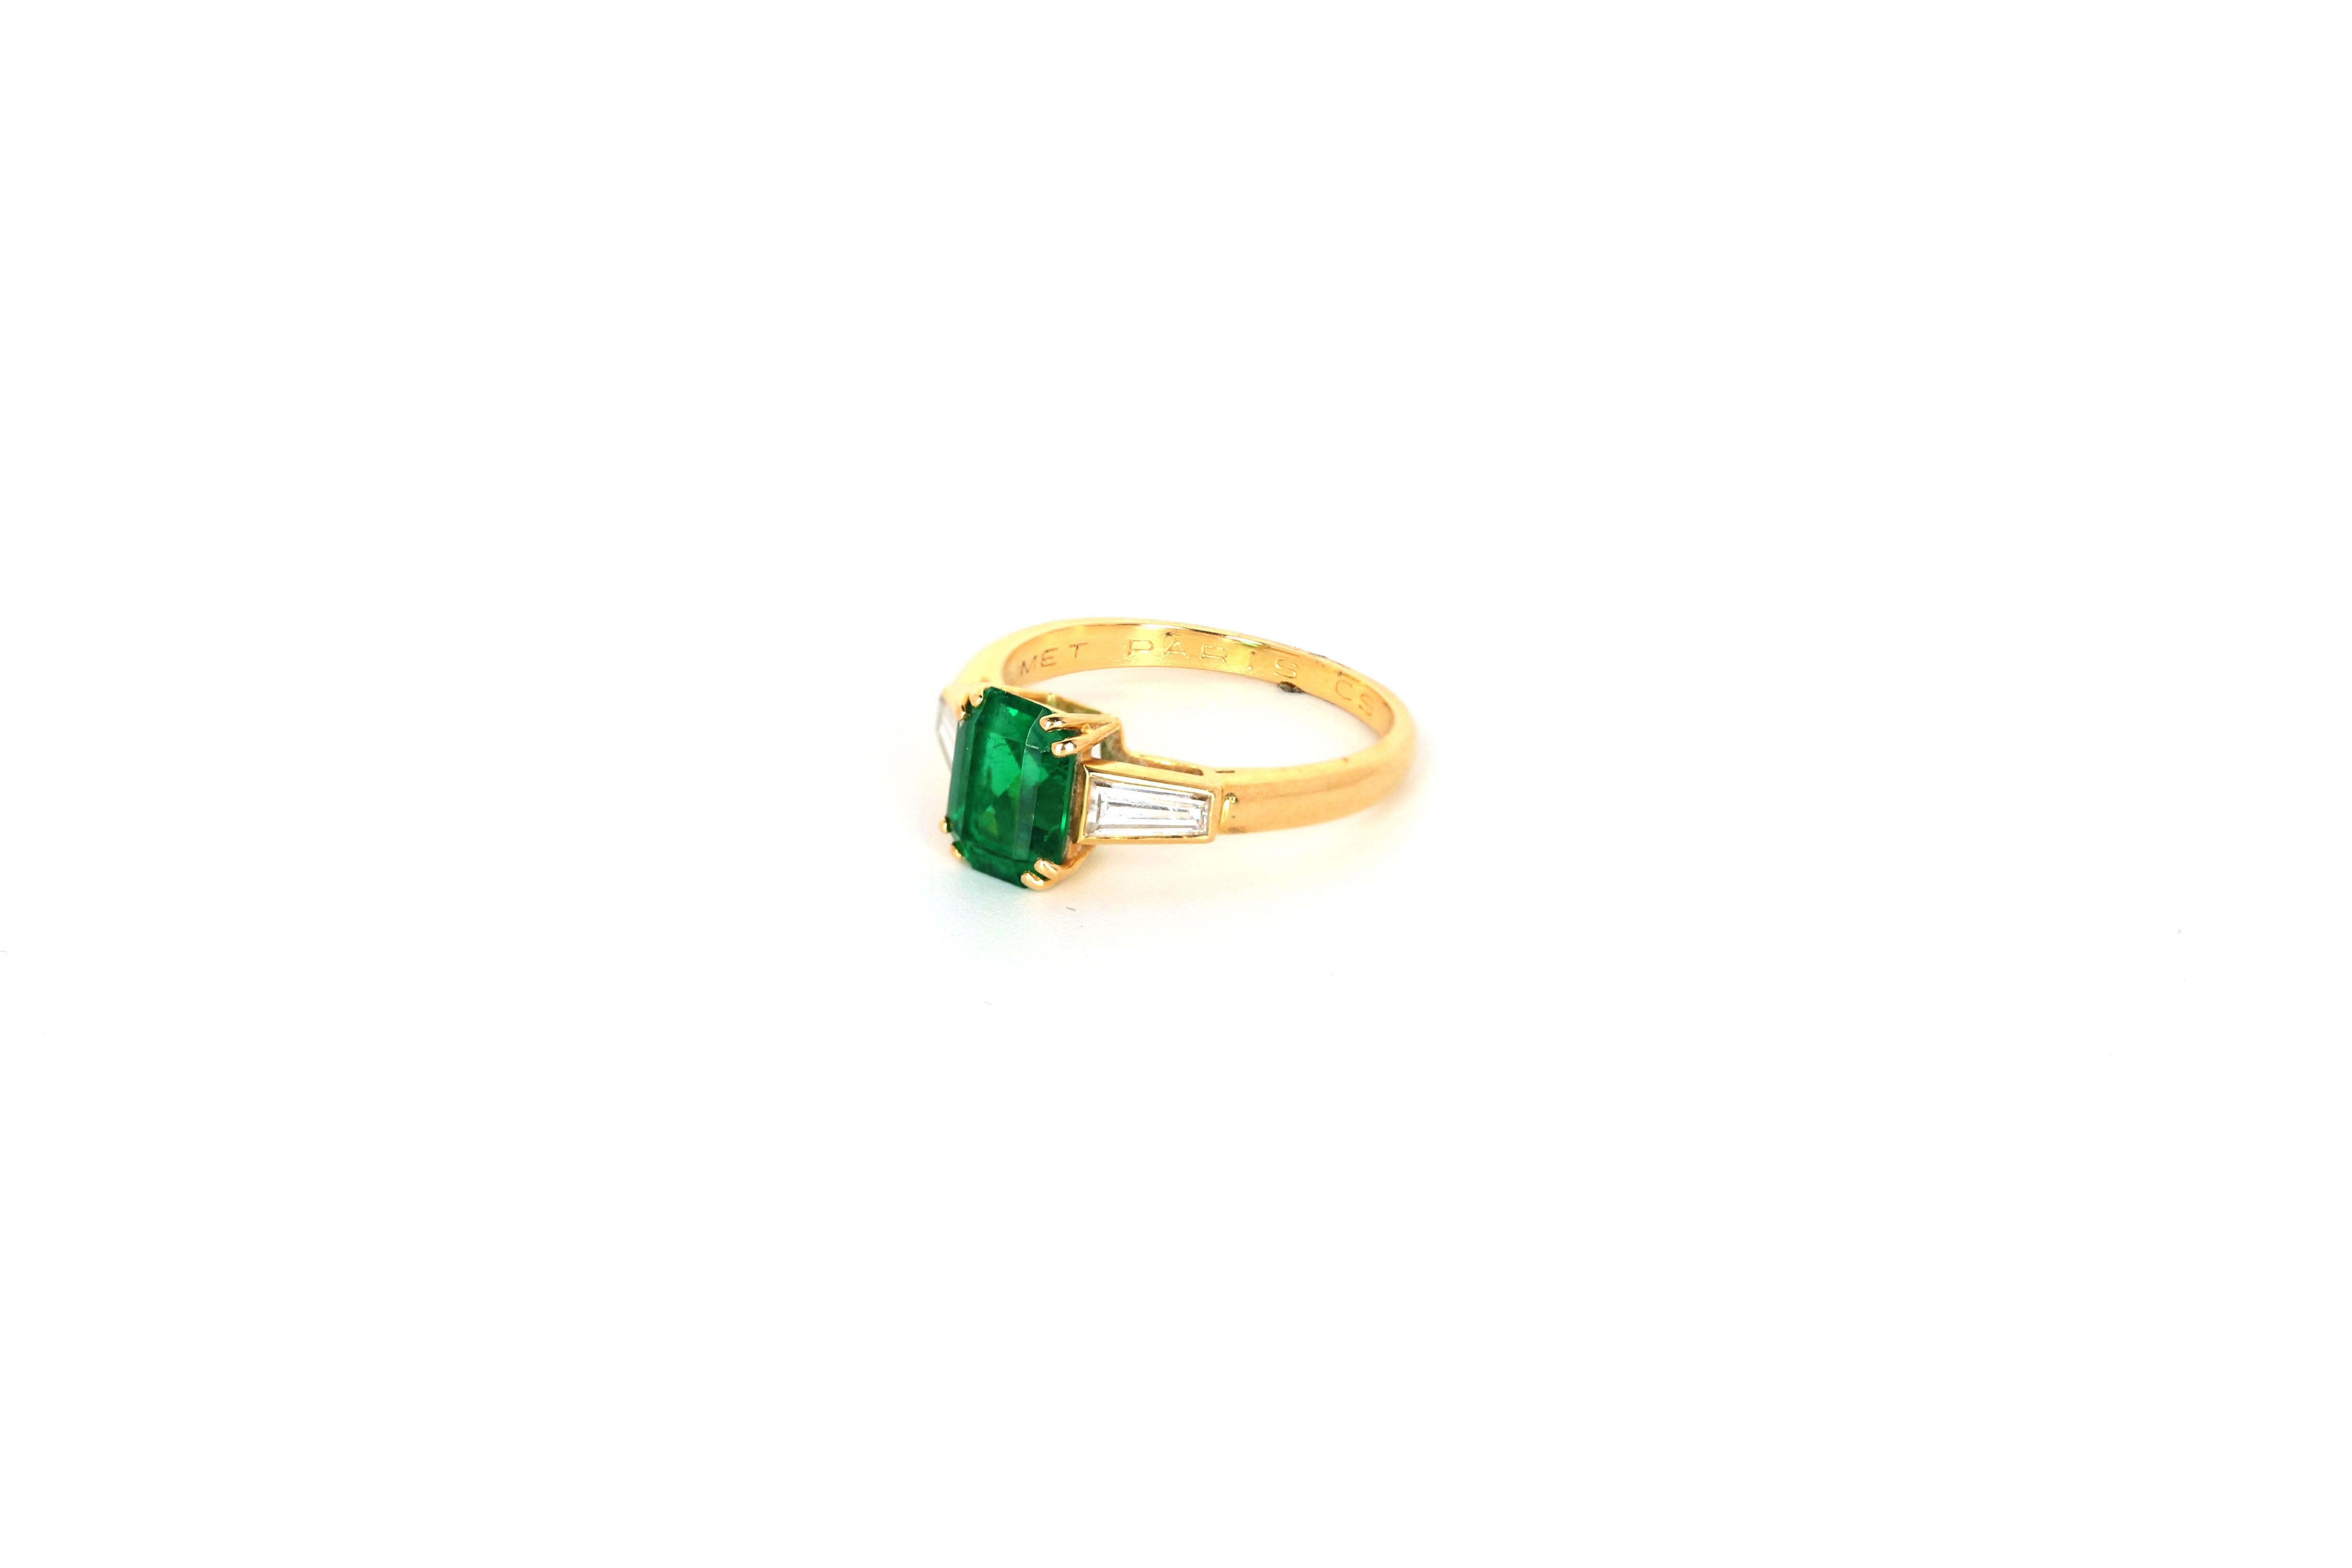 Chaumet 18K yellow gold emerald and diamond ring
Emerald approximately 2 carats, diamonds ~ .25 carats total weight